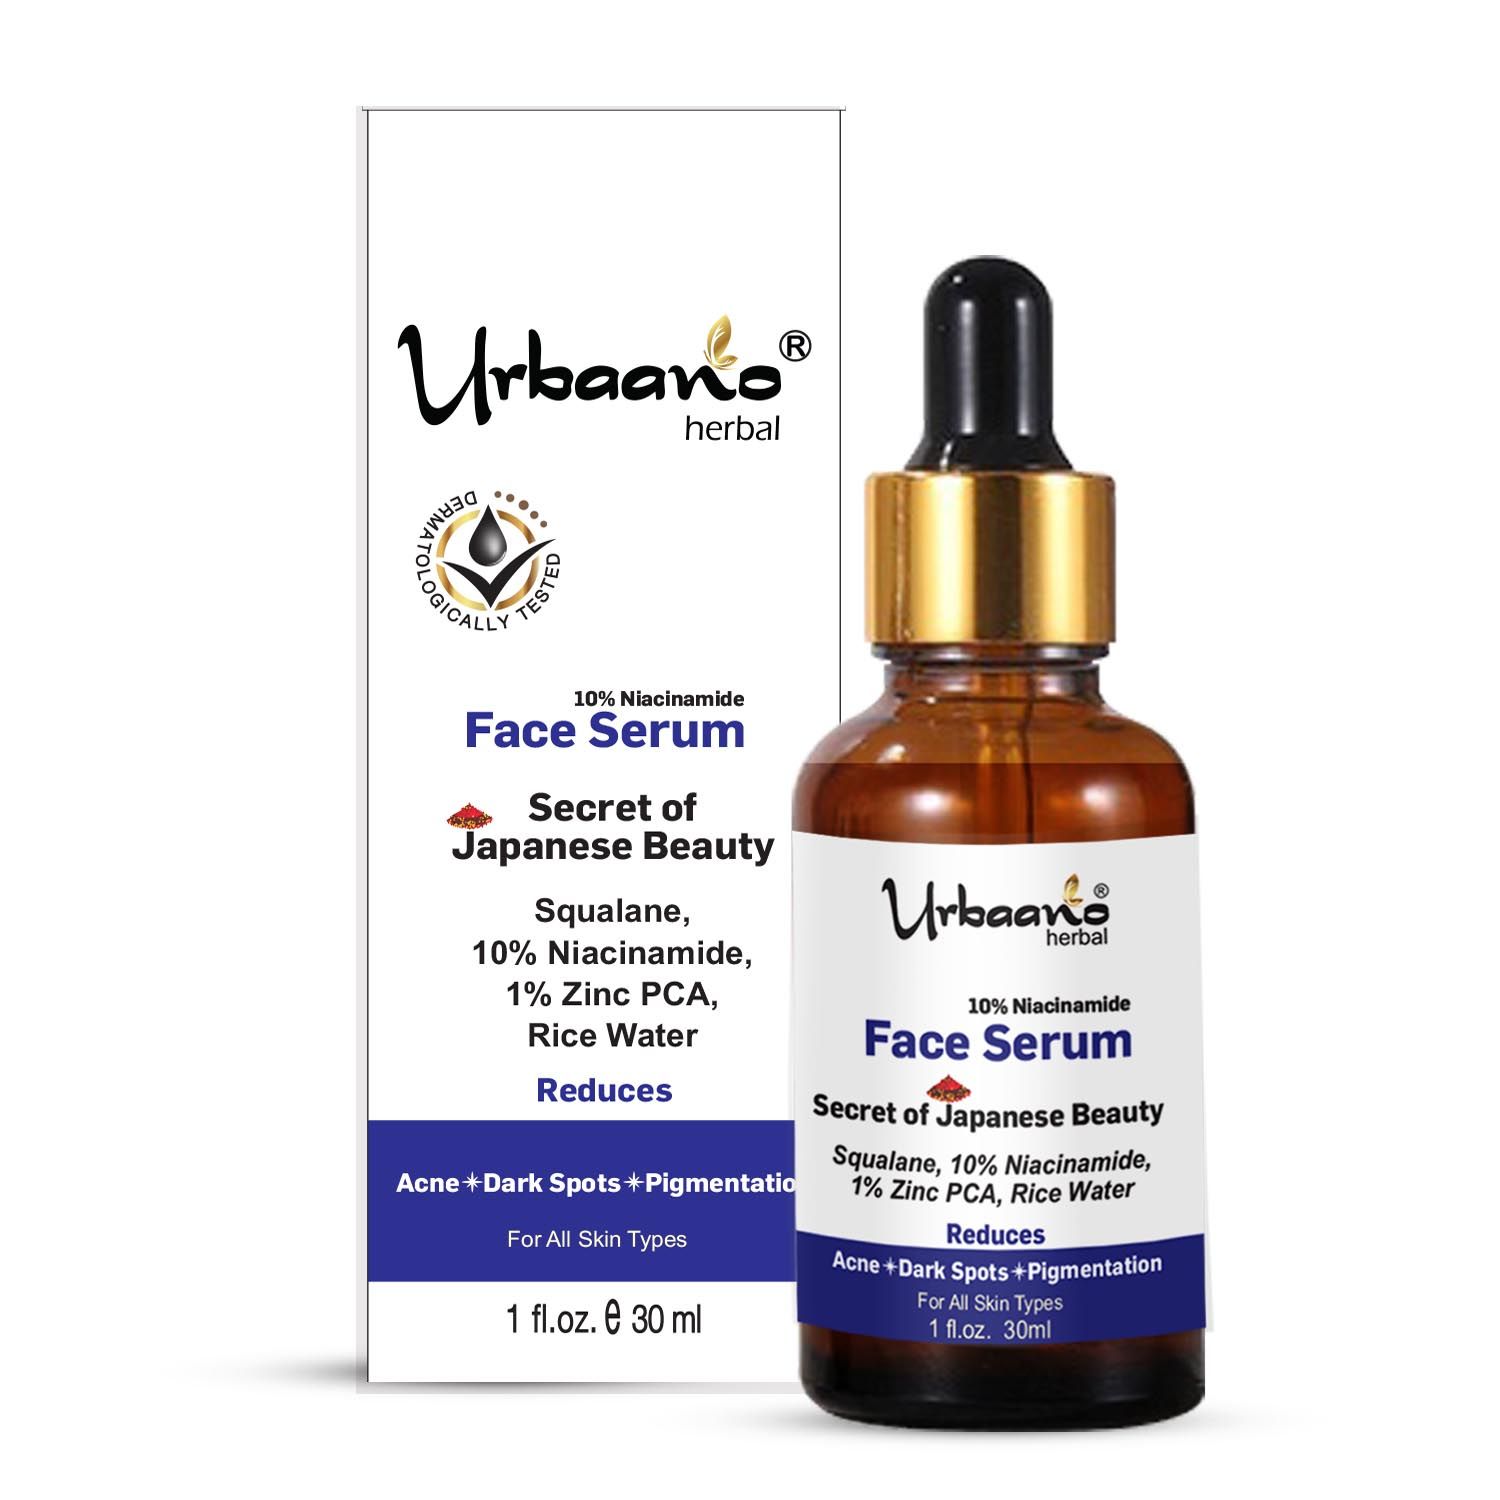 Urbaano Herbal 10% Niacinamide Serum for Acne Mark & Blemishes with Zinc PCA, Ecocert Olive Squalane & Rice Rater For Men & Women - 30ml